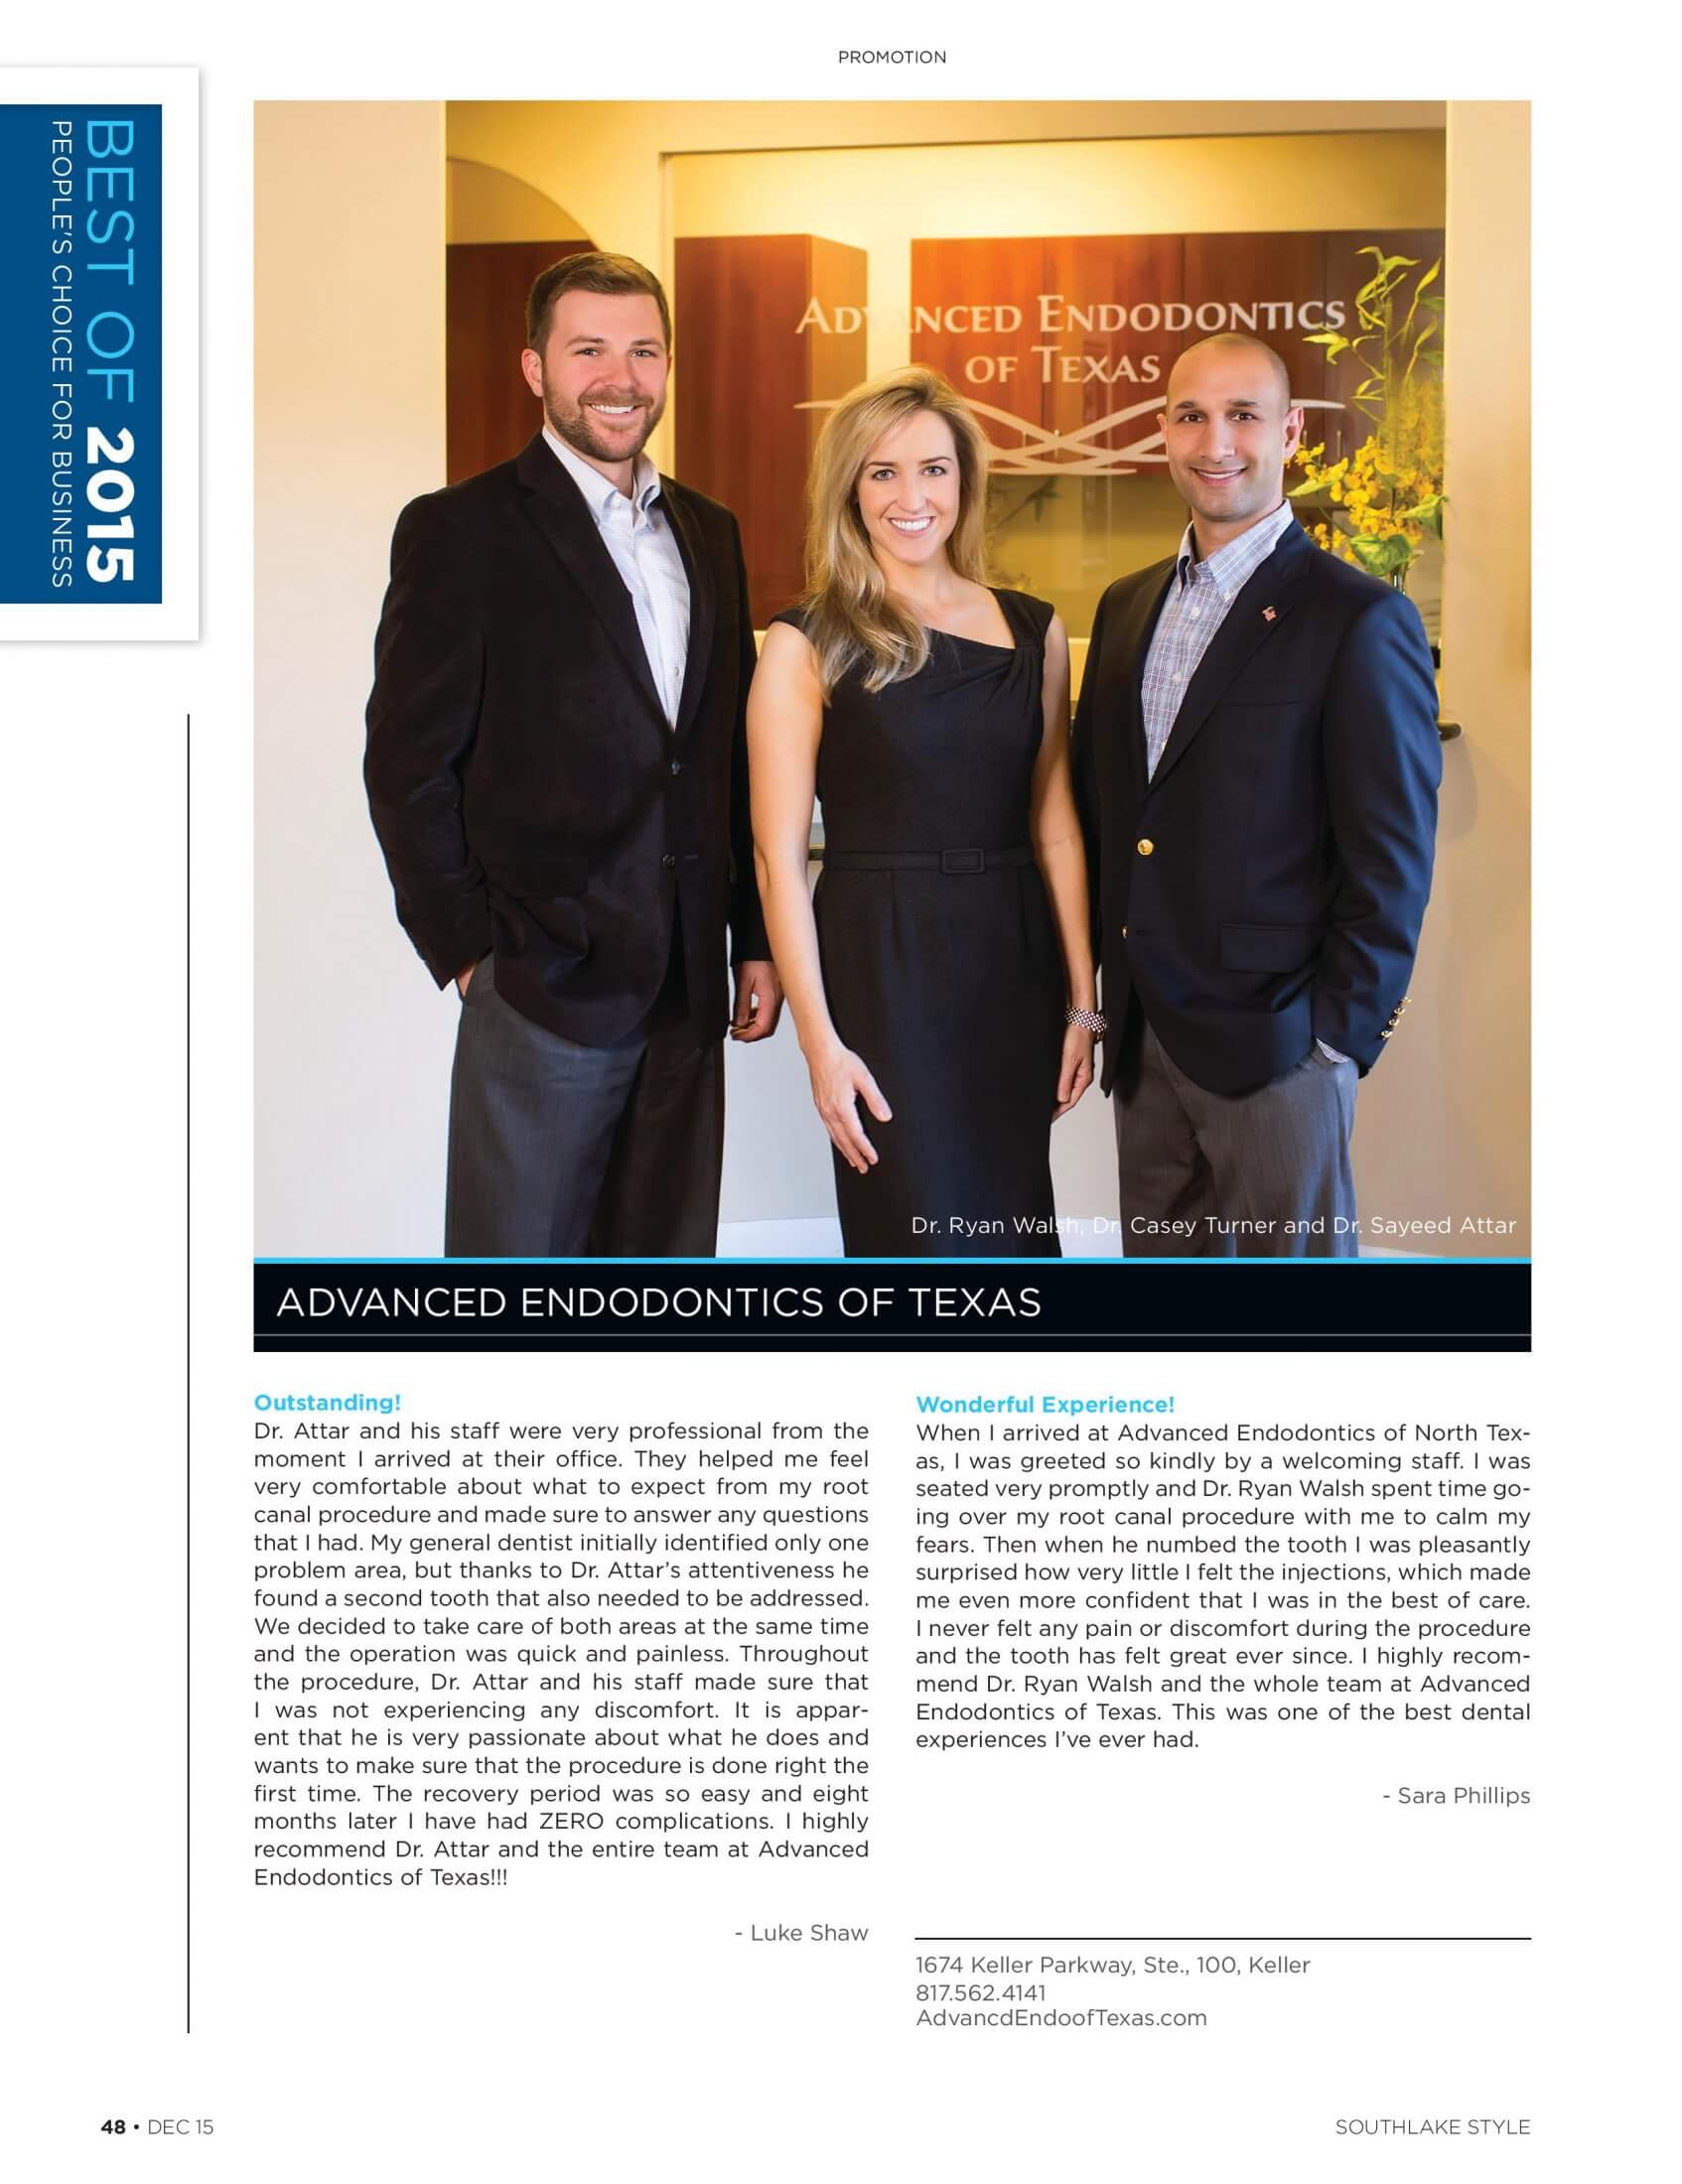 top dentists awards page of advanced endodontics of texas